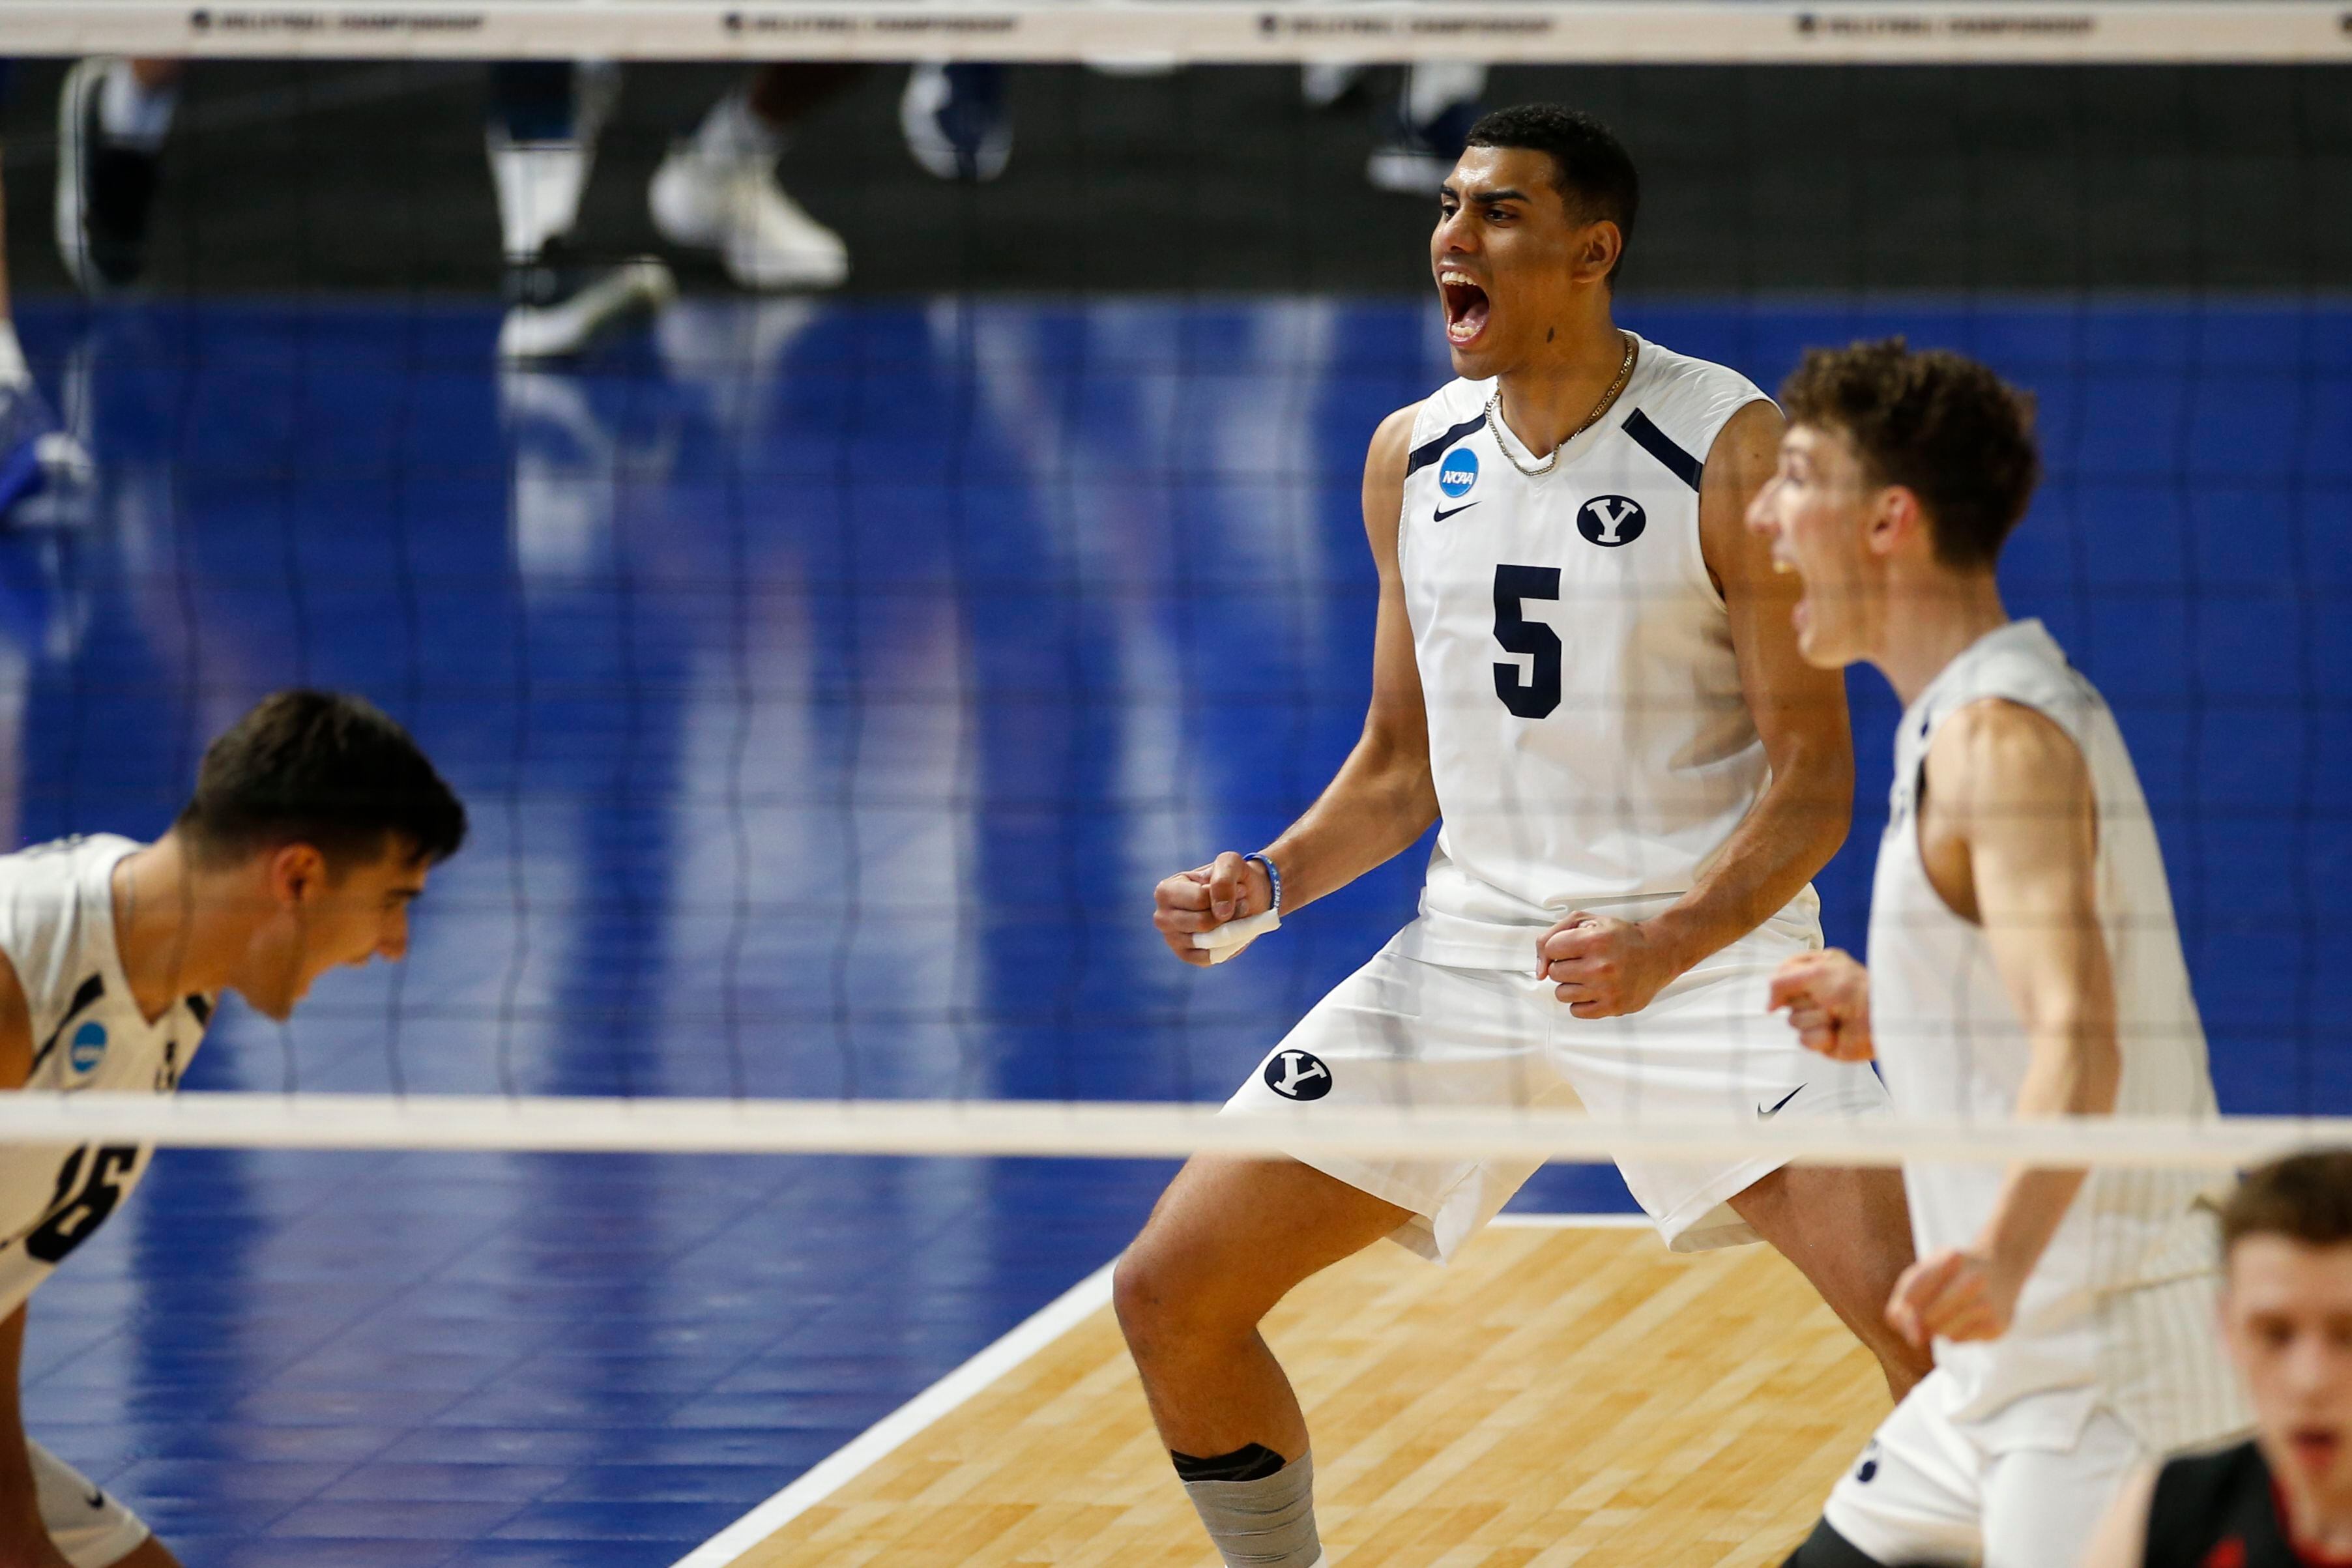 BYU men's volleyball one win away from national title